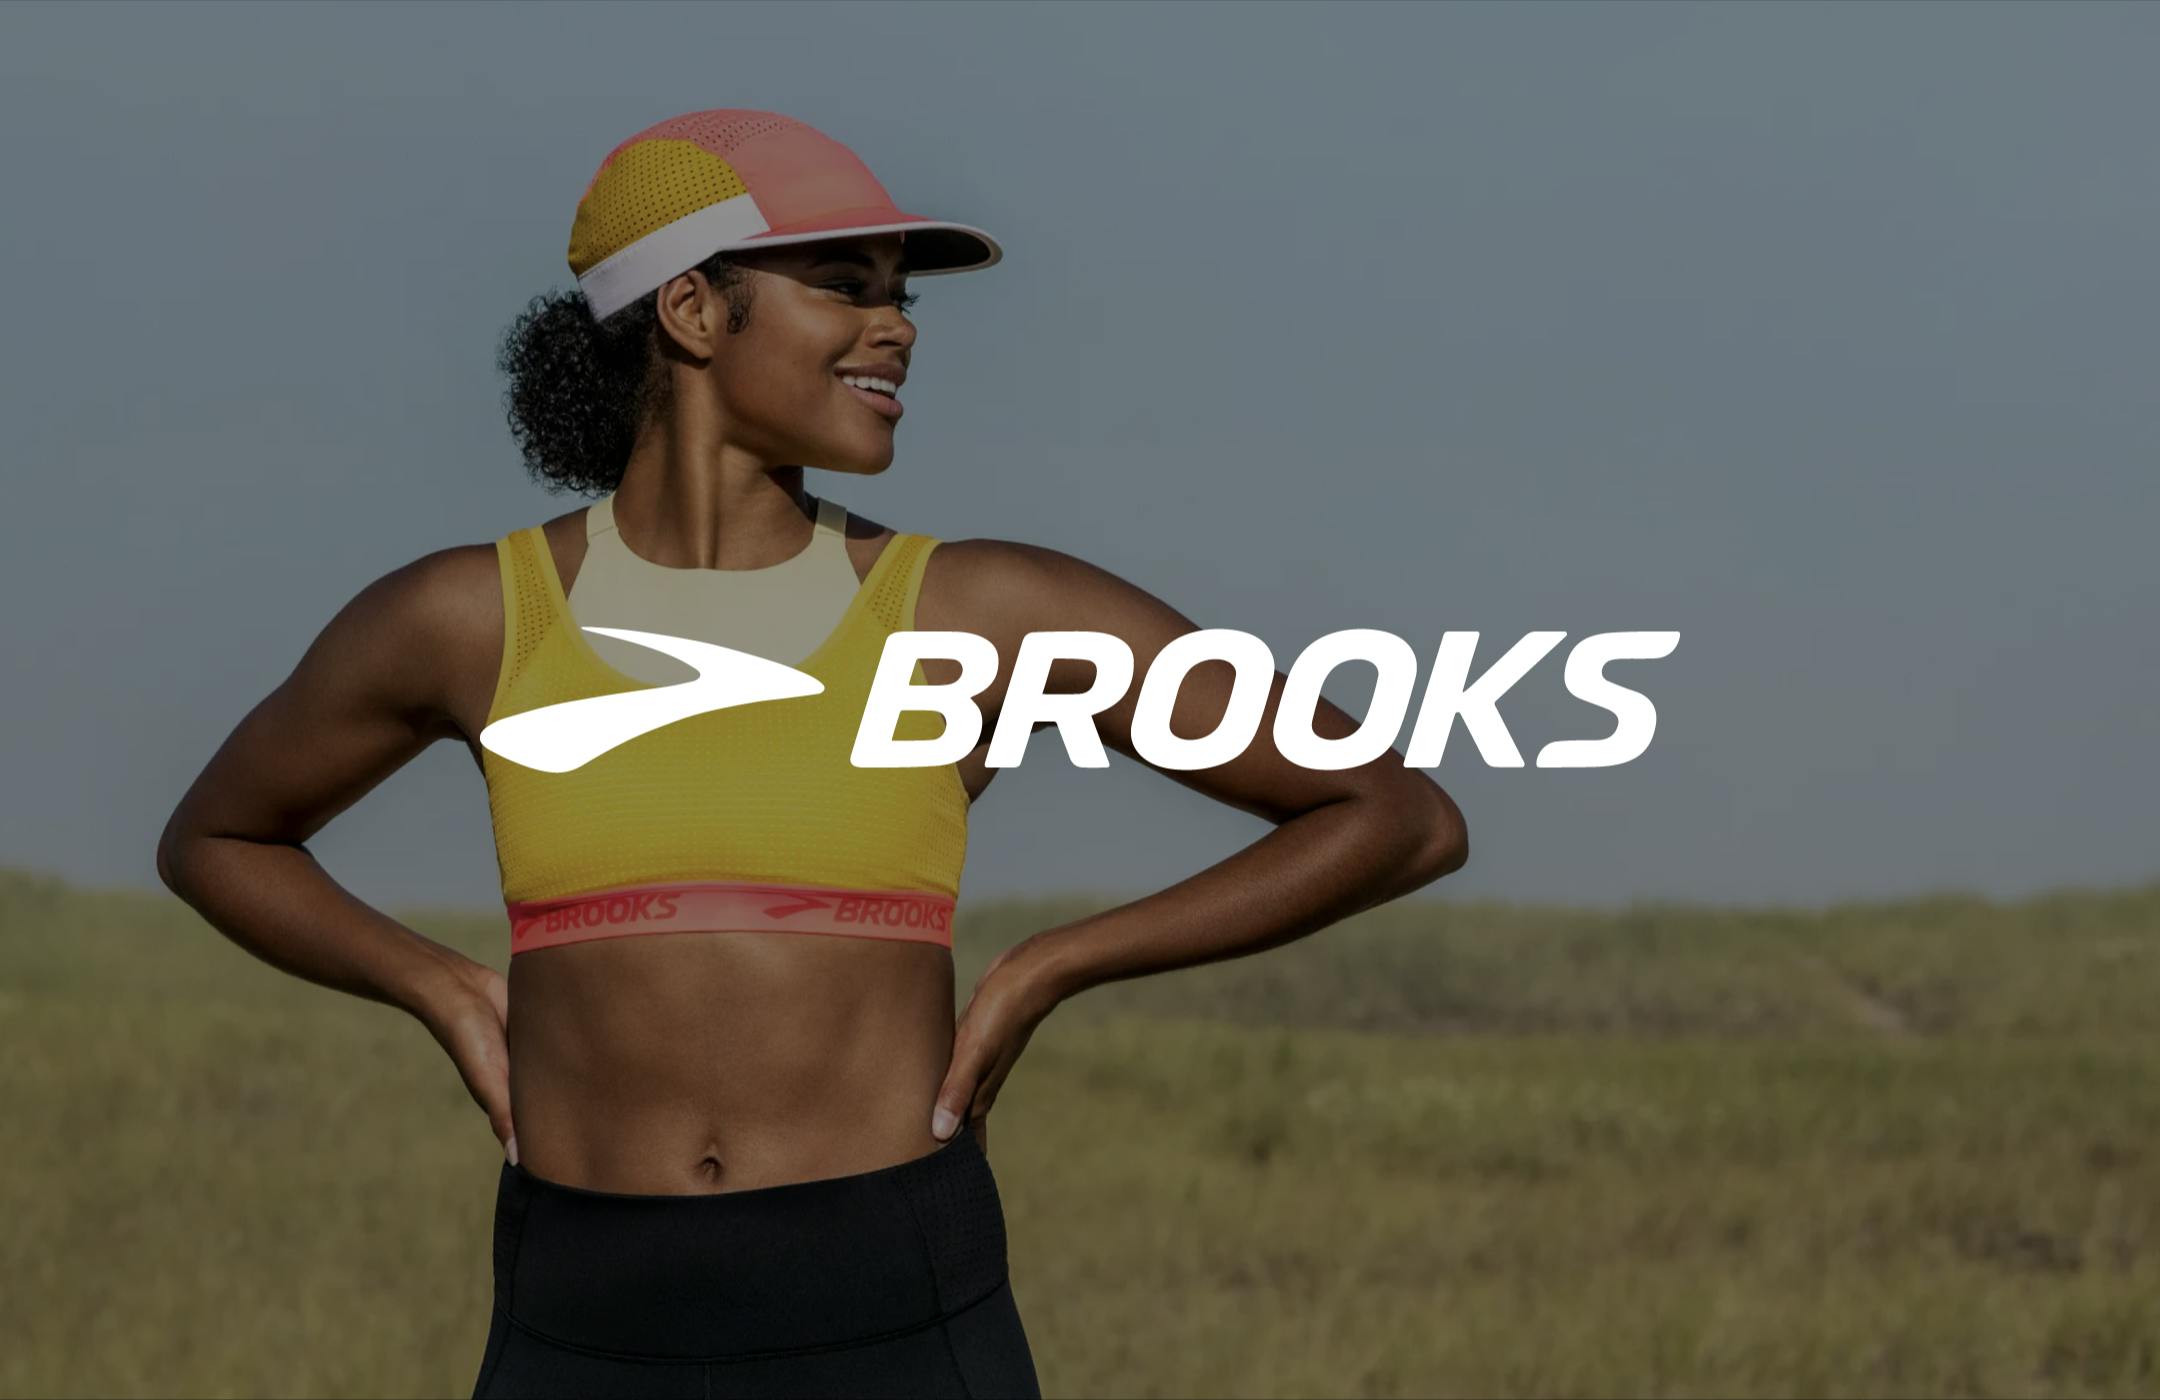 Brooks logo overlaid on top of an image of a runner